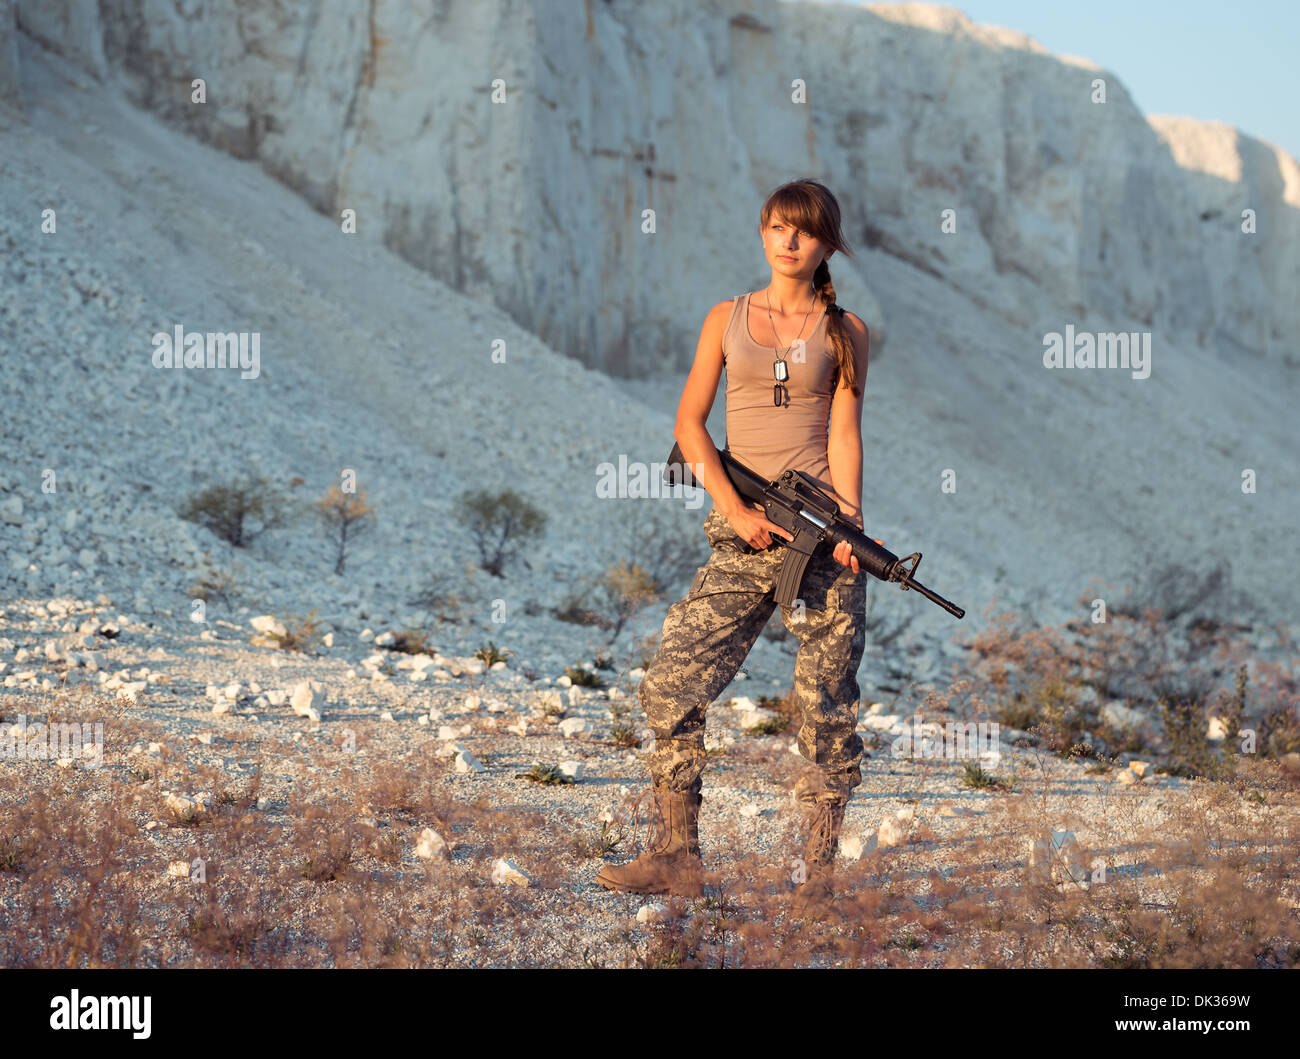 Young beautiful female soldier dressed in a camouflage with a gun in the location Stock Photo